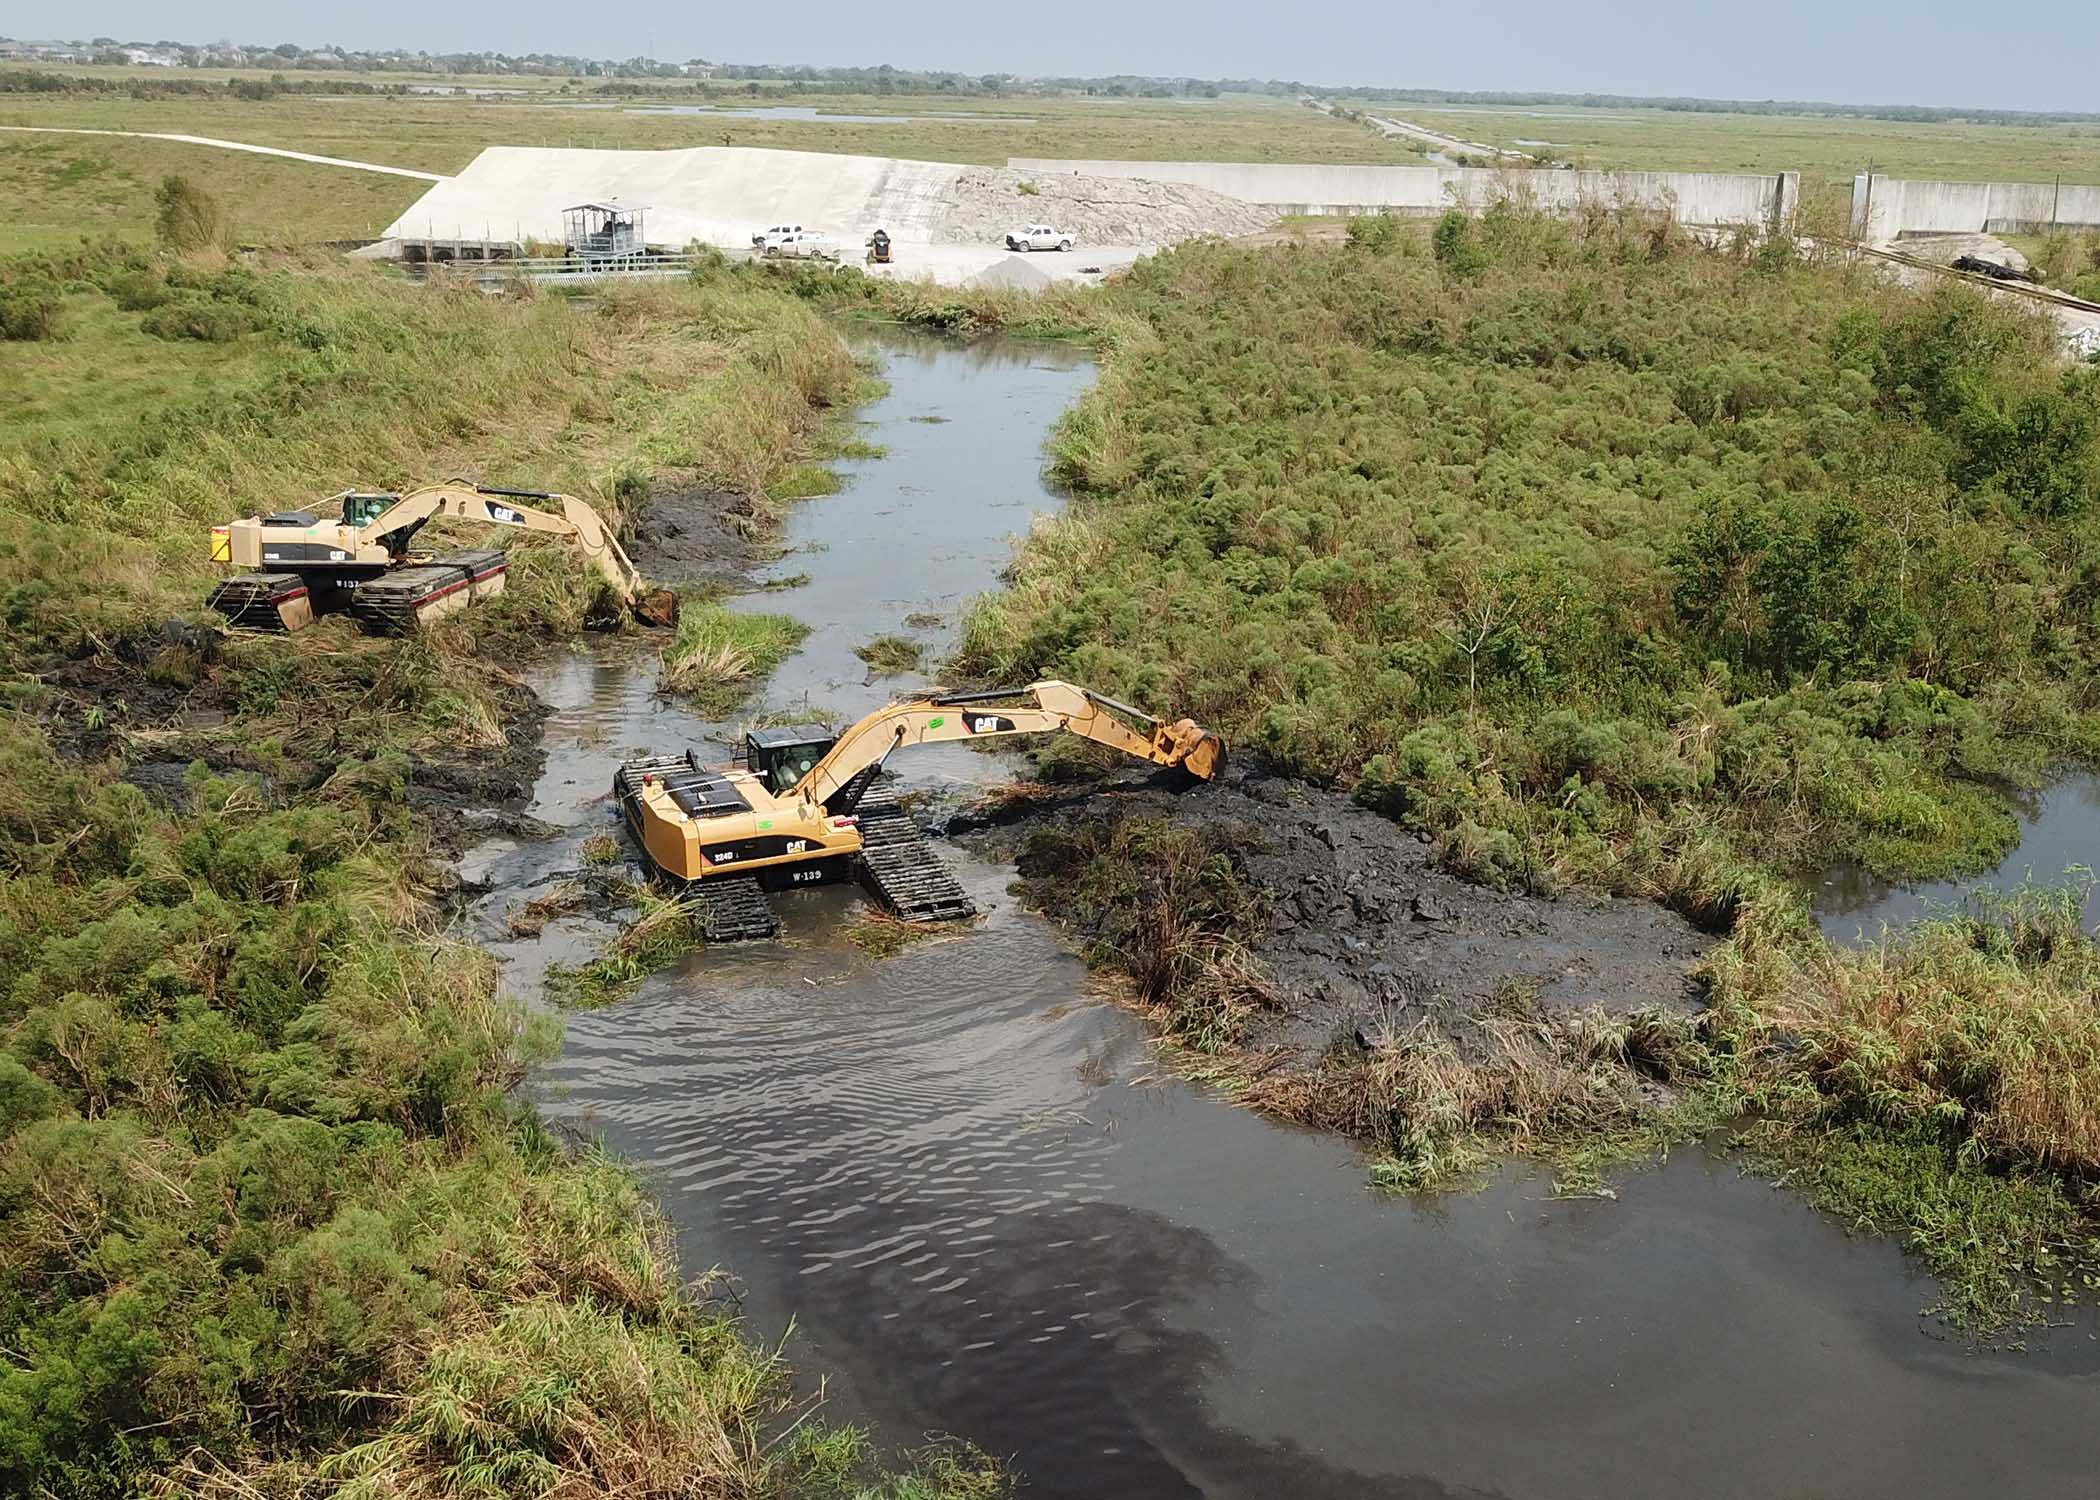 Dredges maintaining water control channel near hurricane protection levee.